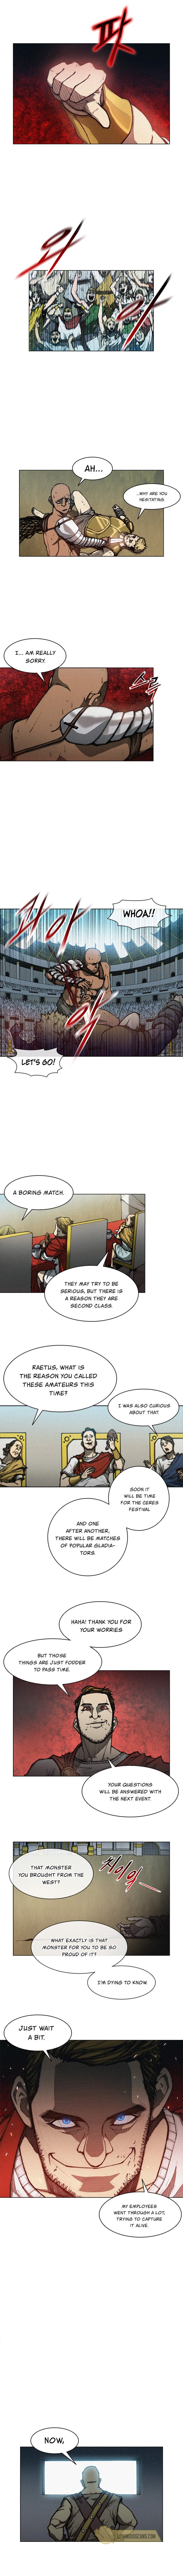 long-way-of-the-warrior-chap-4-9